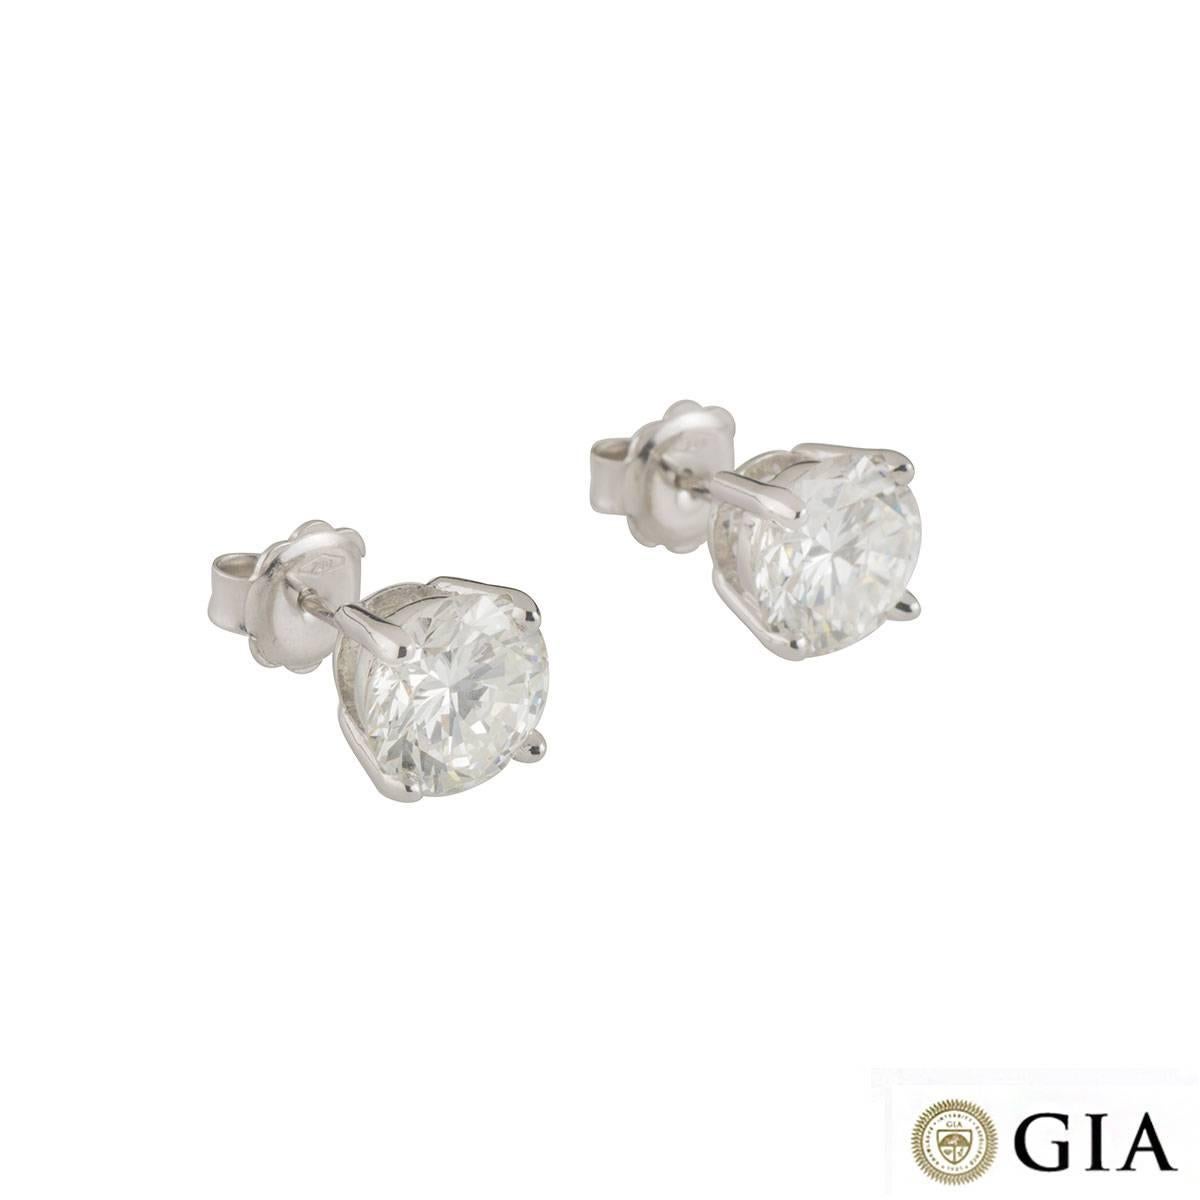 A gorgeous pair of 18k white gold diamonds stud earrings. Each earring is set with a single round brilliant cut diamond within a classic four claw setting. The first diamond weighs 2.64ct, is H colour, VS1 clarity and the second weighs 2.48ct, I